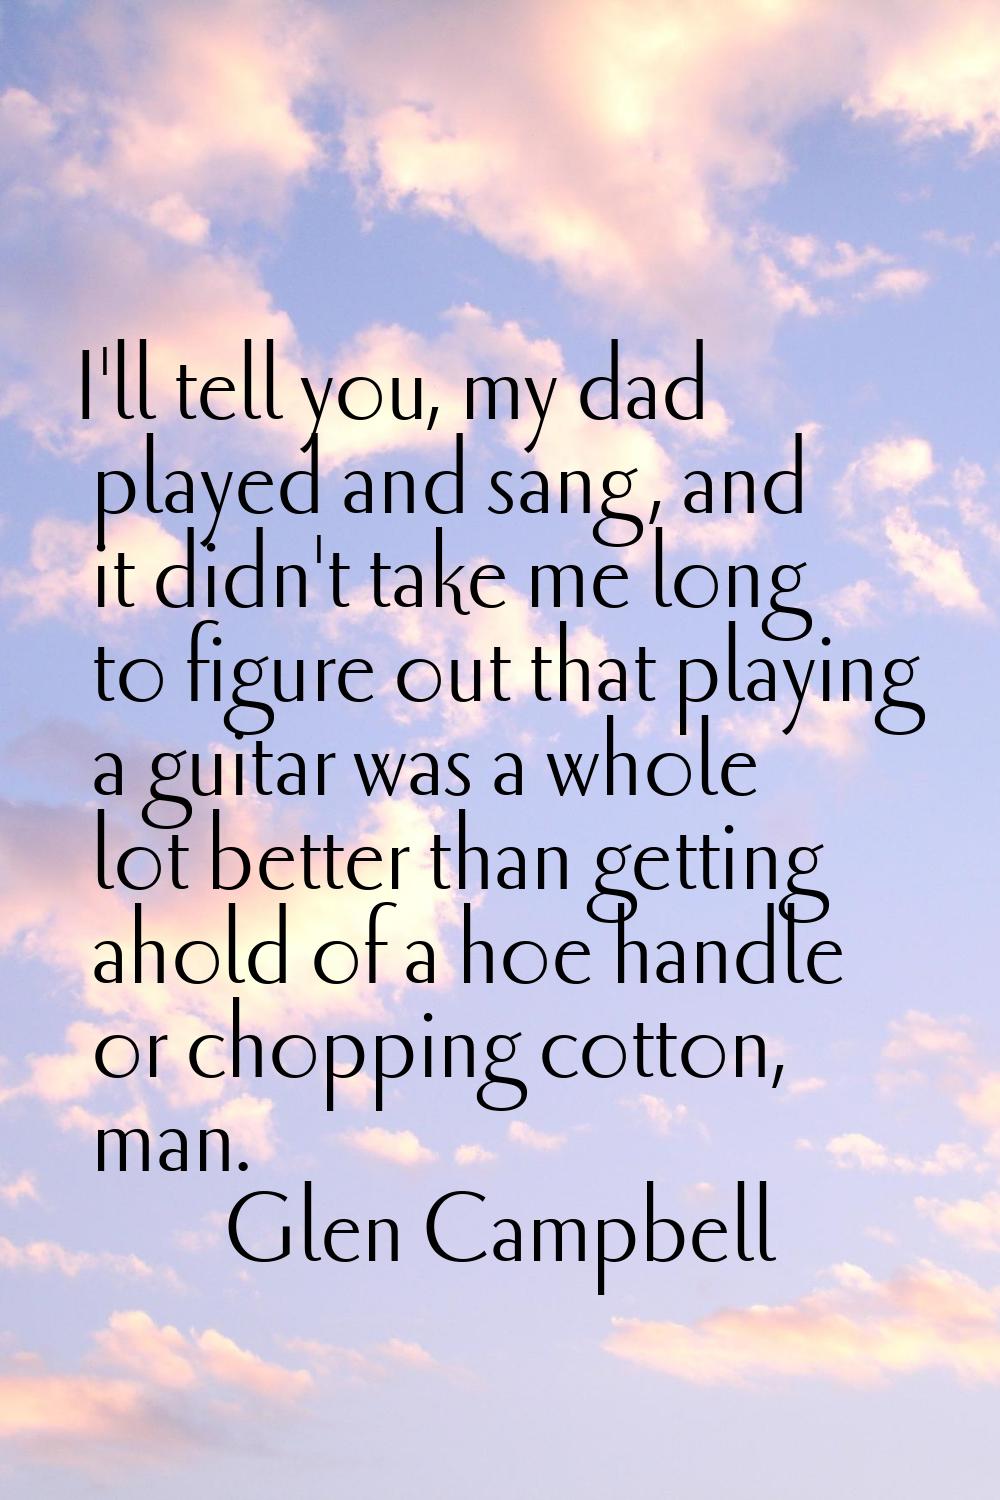 I'll tell you, my dad played and sang, and it didn't take me long to figure out that playing a guit